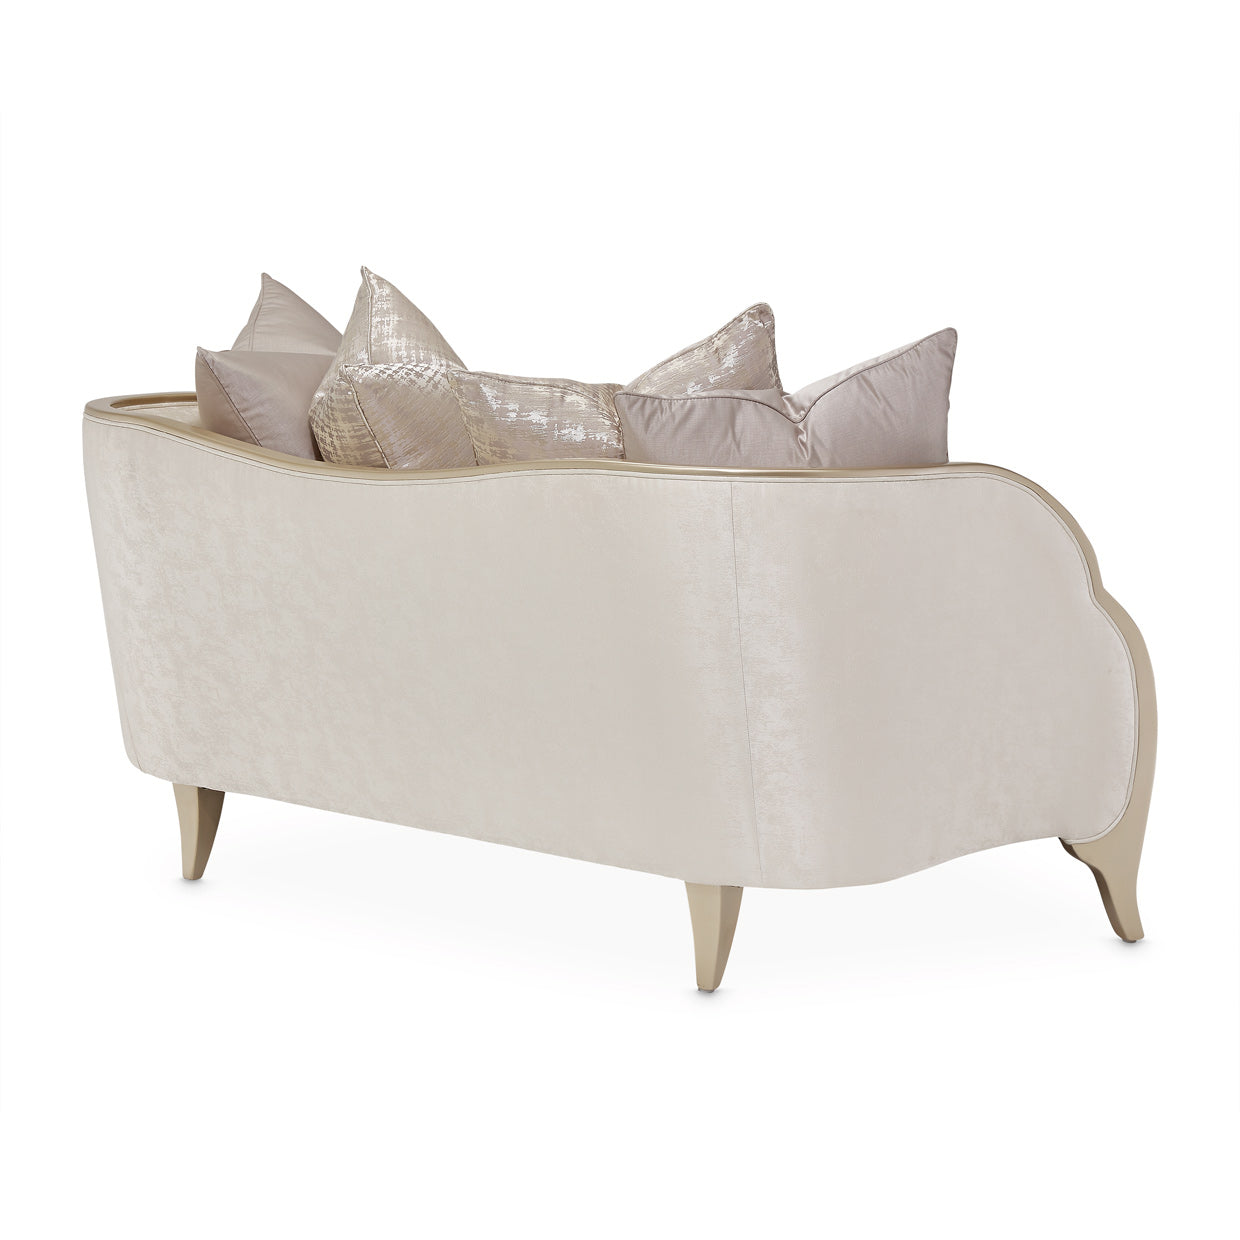 Loveseat CLDWH Chardonnay, Comfort, Elegance, Home décor, Exquisite charm, Timeless style, Sophistication, Luxury seating, Plush cushions, Sleek finish, Relaxation, Refined beauty, Allure, Chic design, dream art, Michael amini